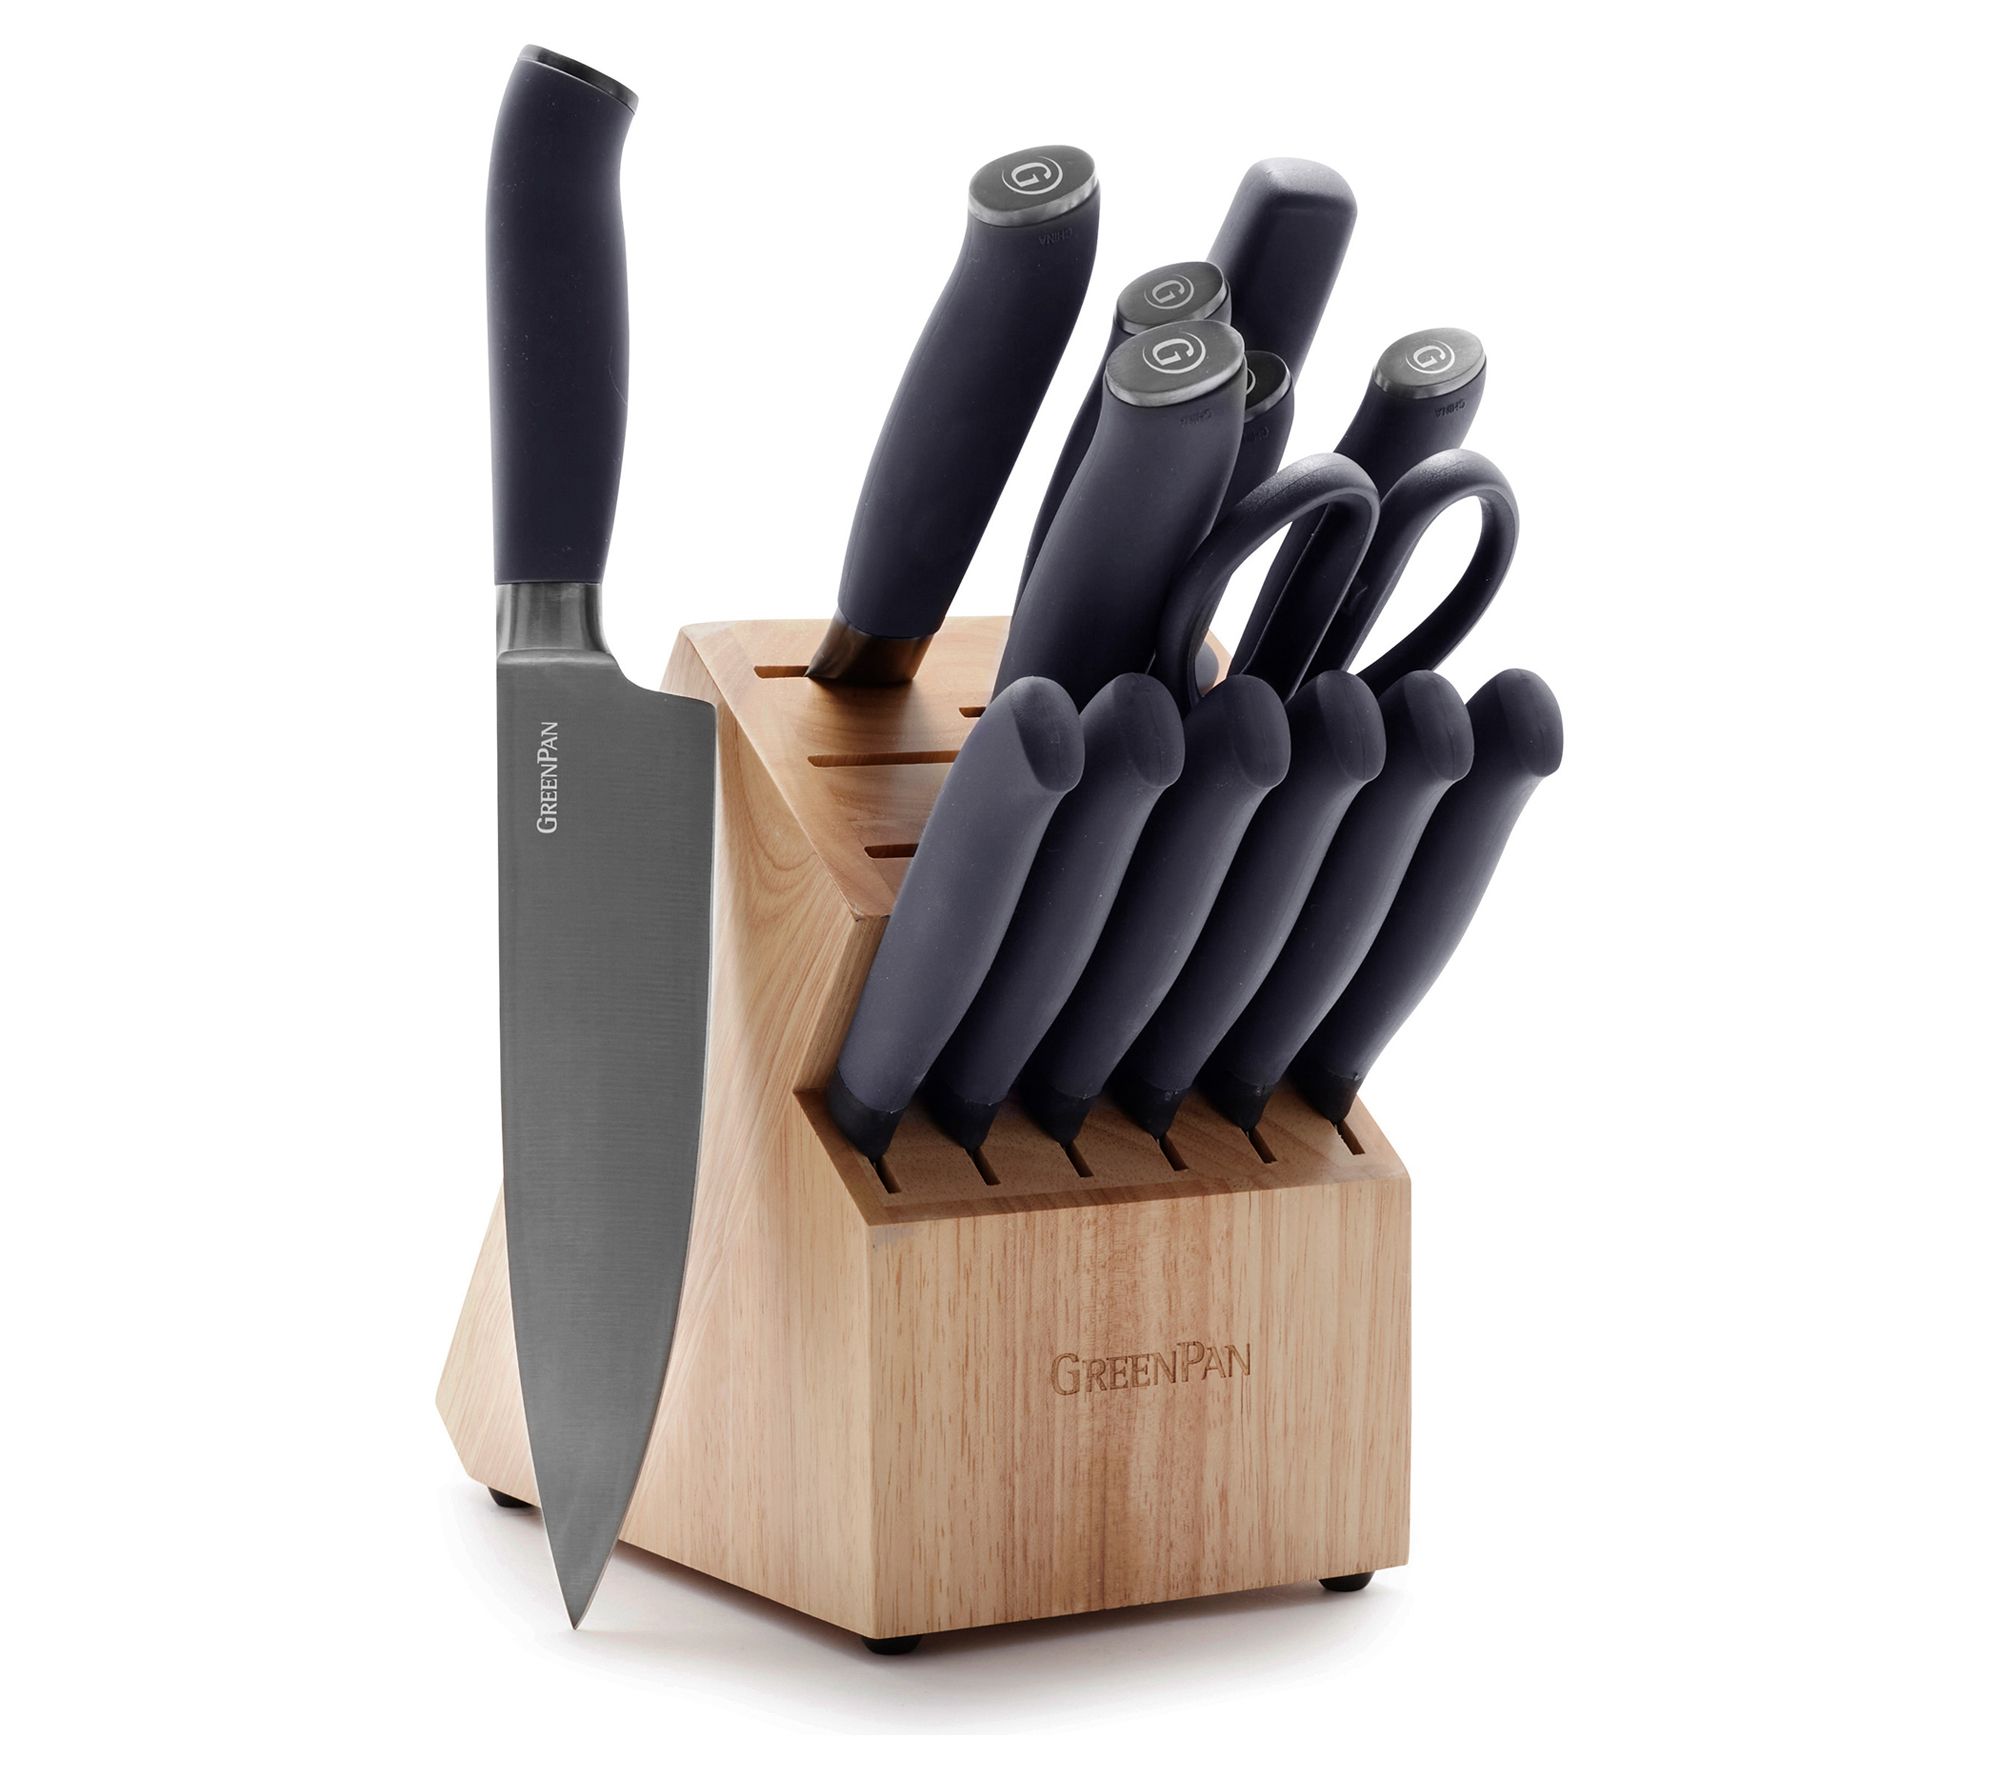 Oster Langmore 15 Piece Stainless Steel Blade Cutlery Set in Purple